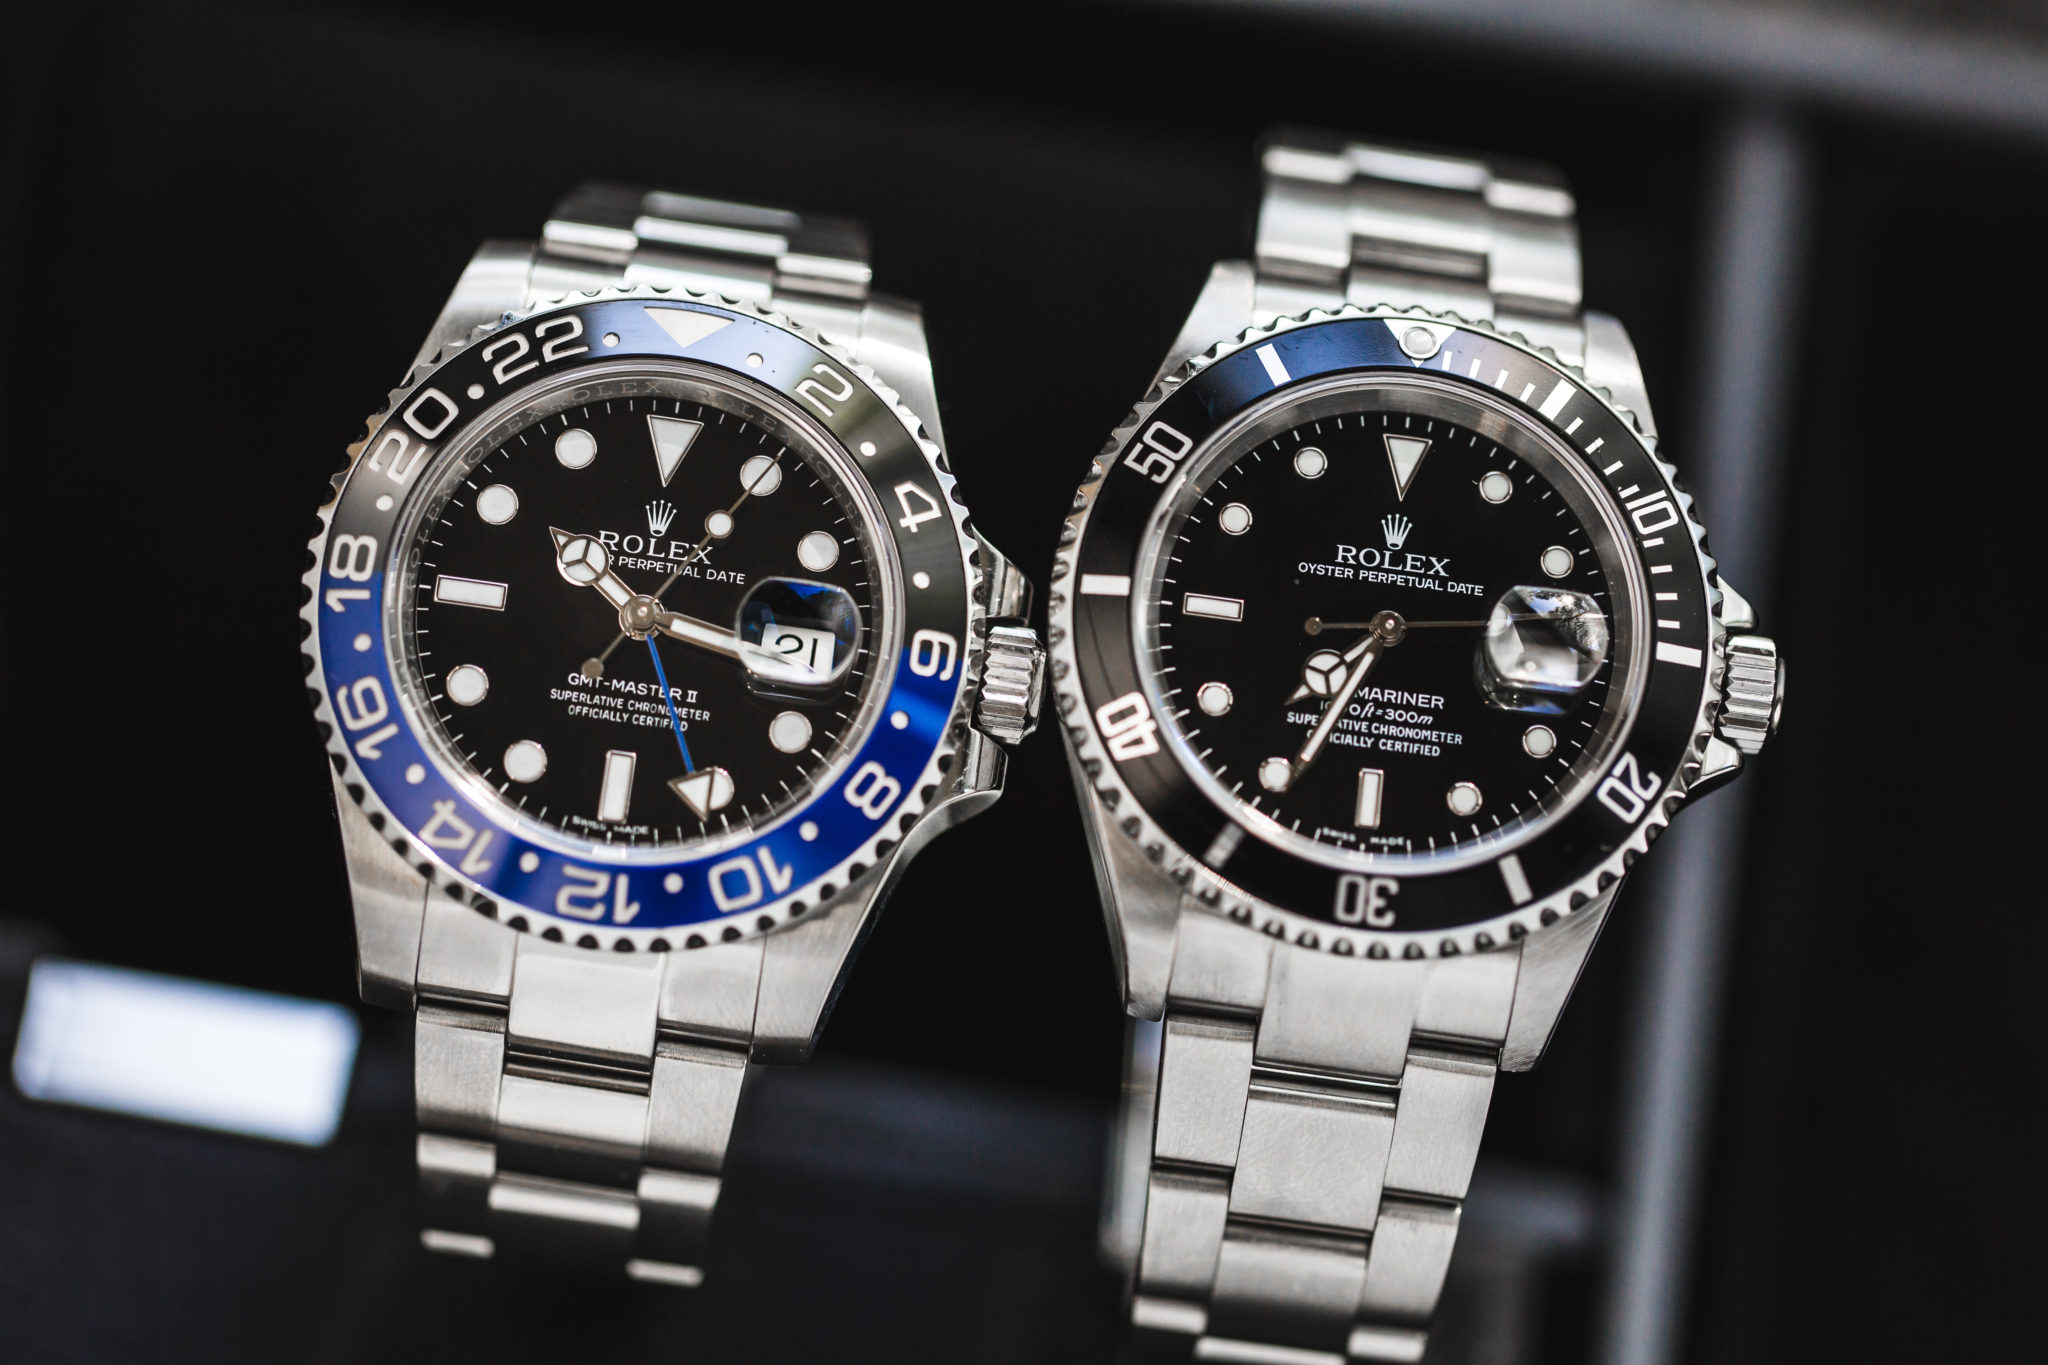 An image of a GMT Master II "Batman" next to a black dial Submariner